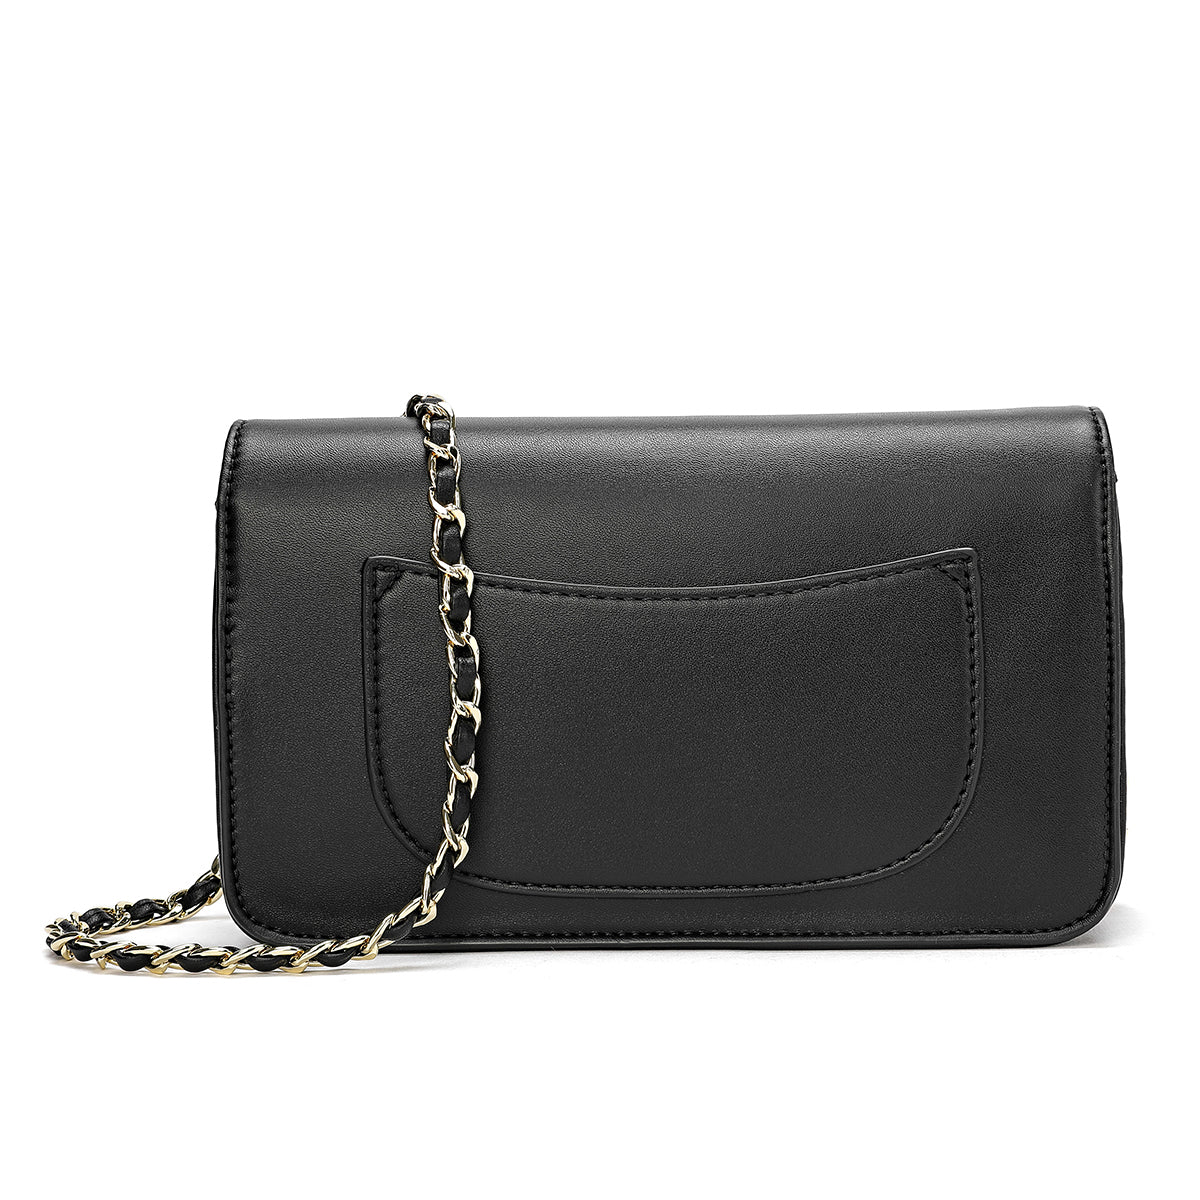 Crossbody bag with front buckle and chain strap 20.5cm wide in black or apple green